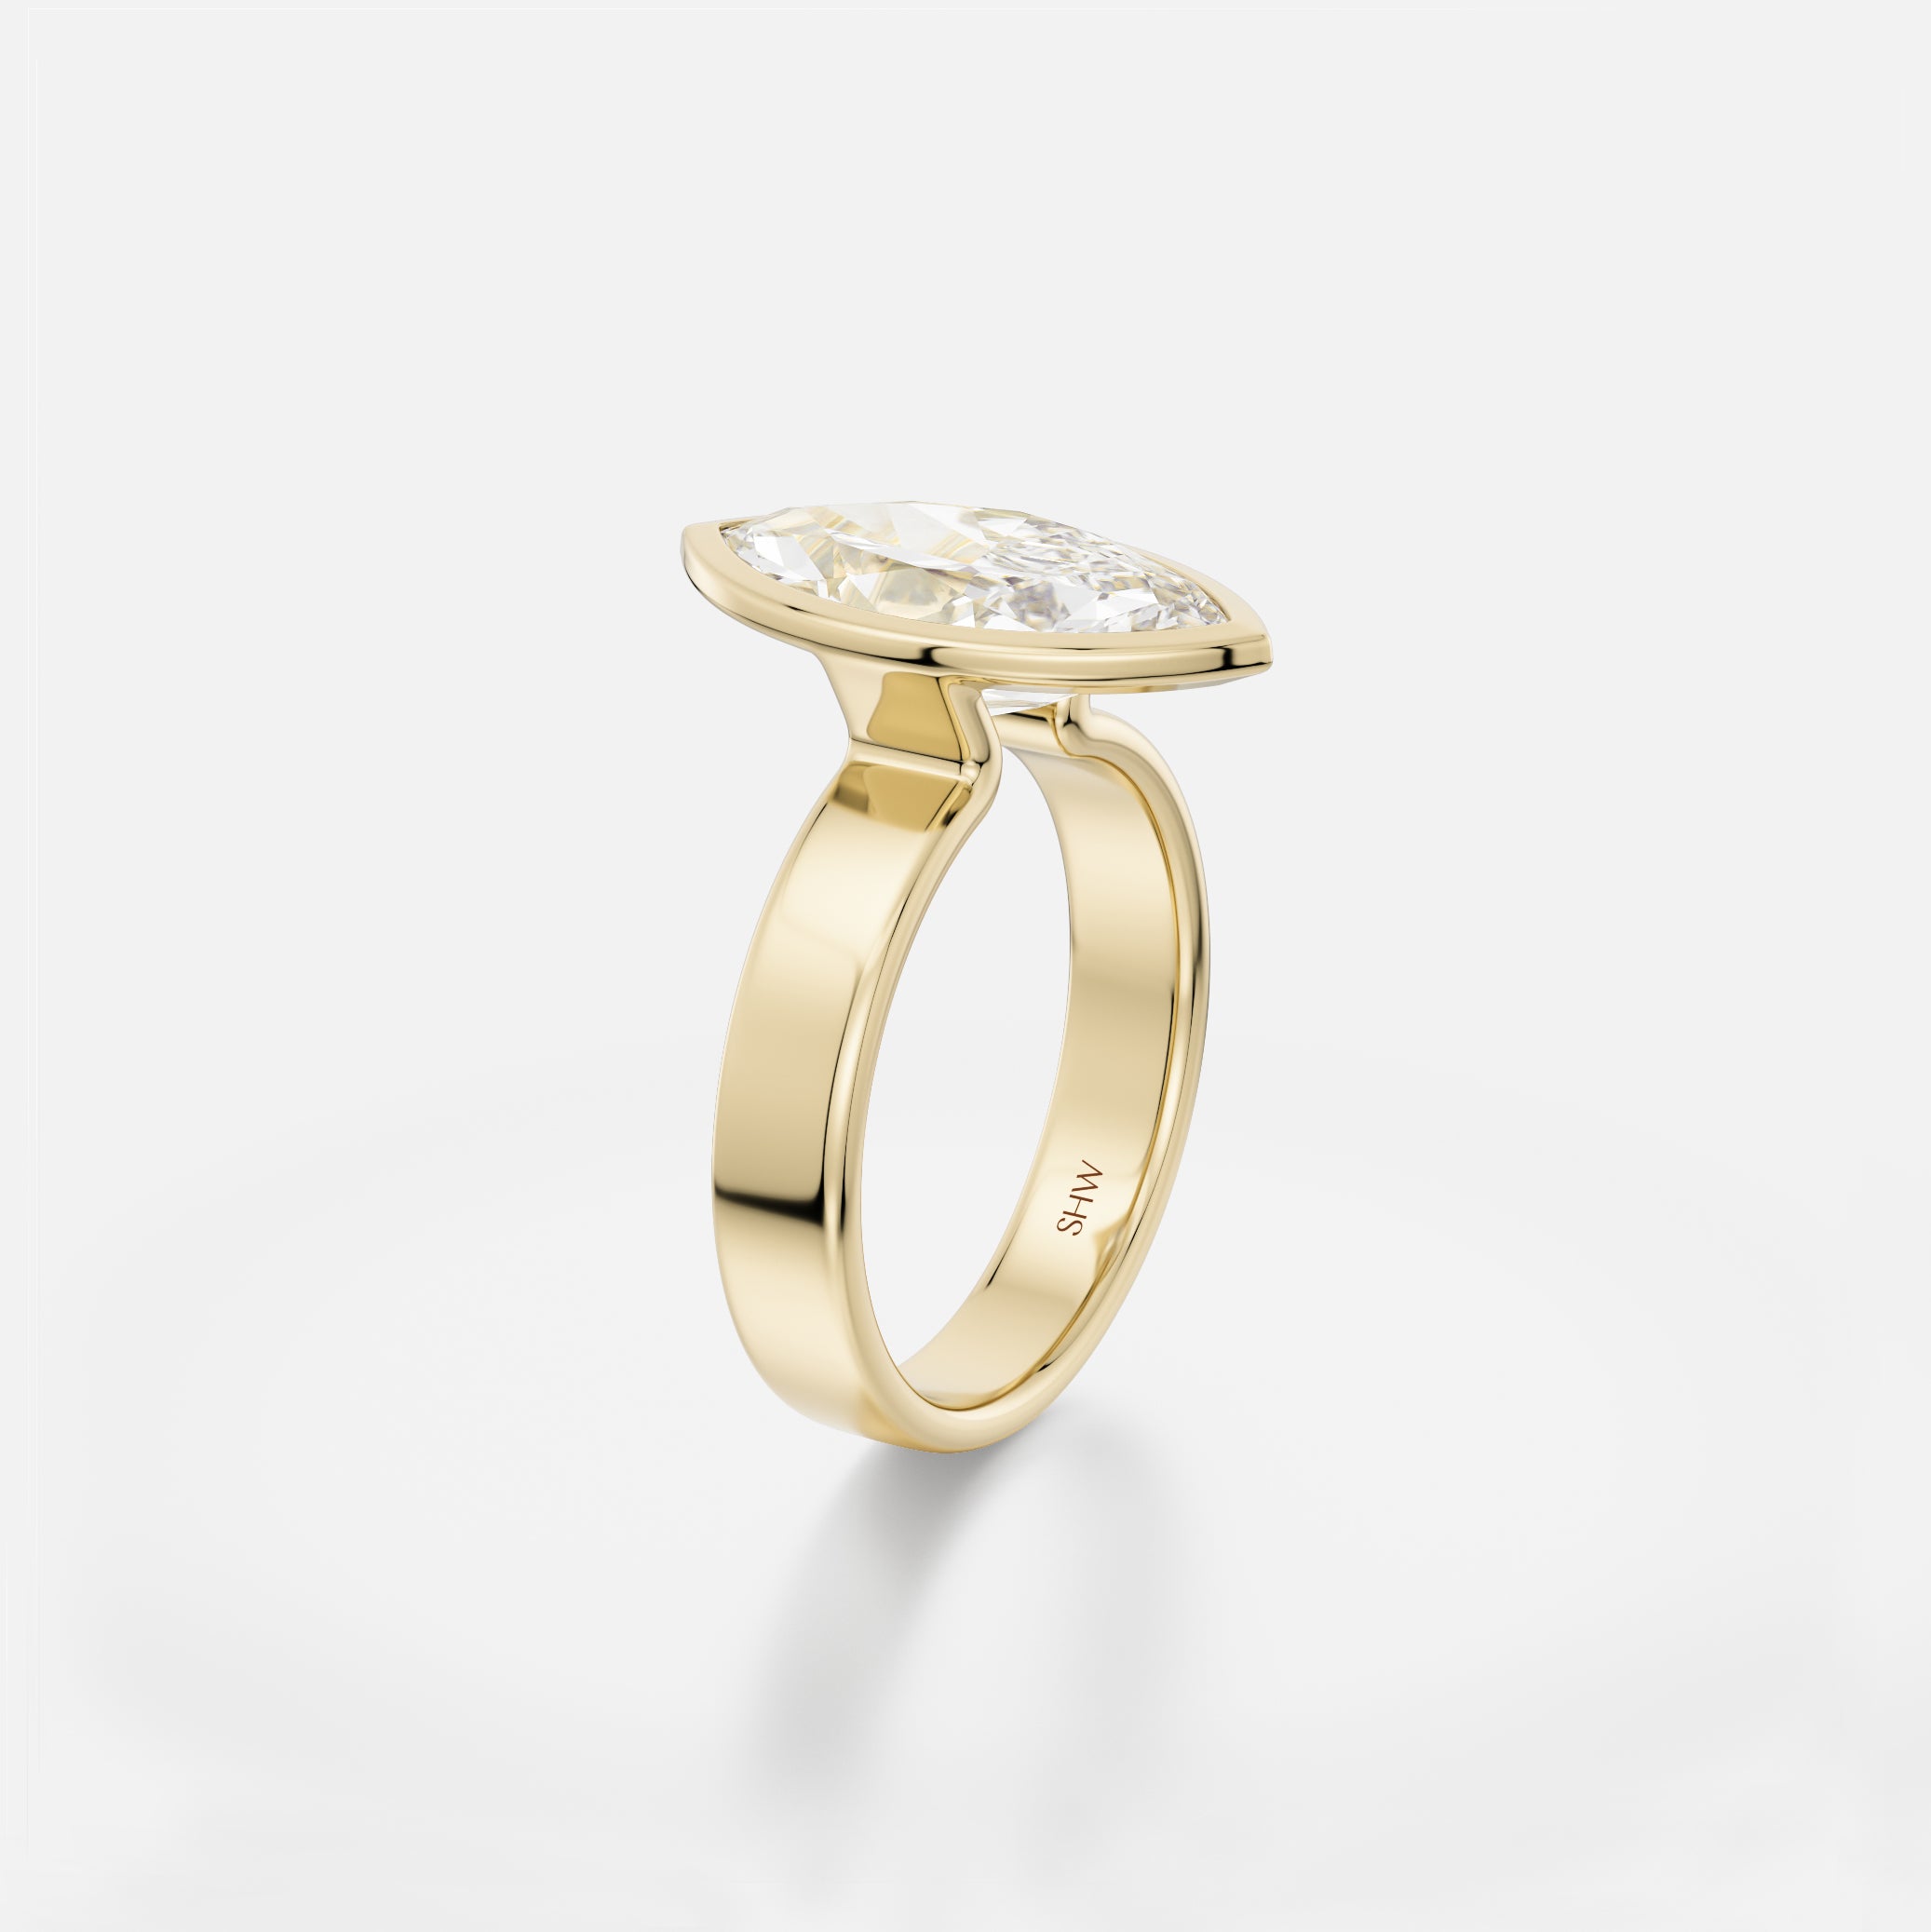 Badi Flat Sculptural Wide Large Band with North South Marquise Cut Profile Bezel Set Unique Engagement Ring Setting in recycled 14k Gold or platinum by SHW Fine Jewelry NYC